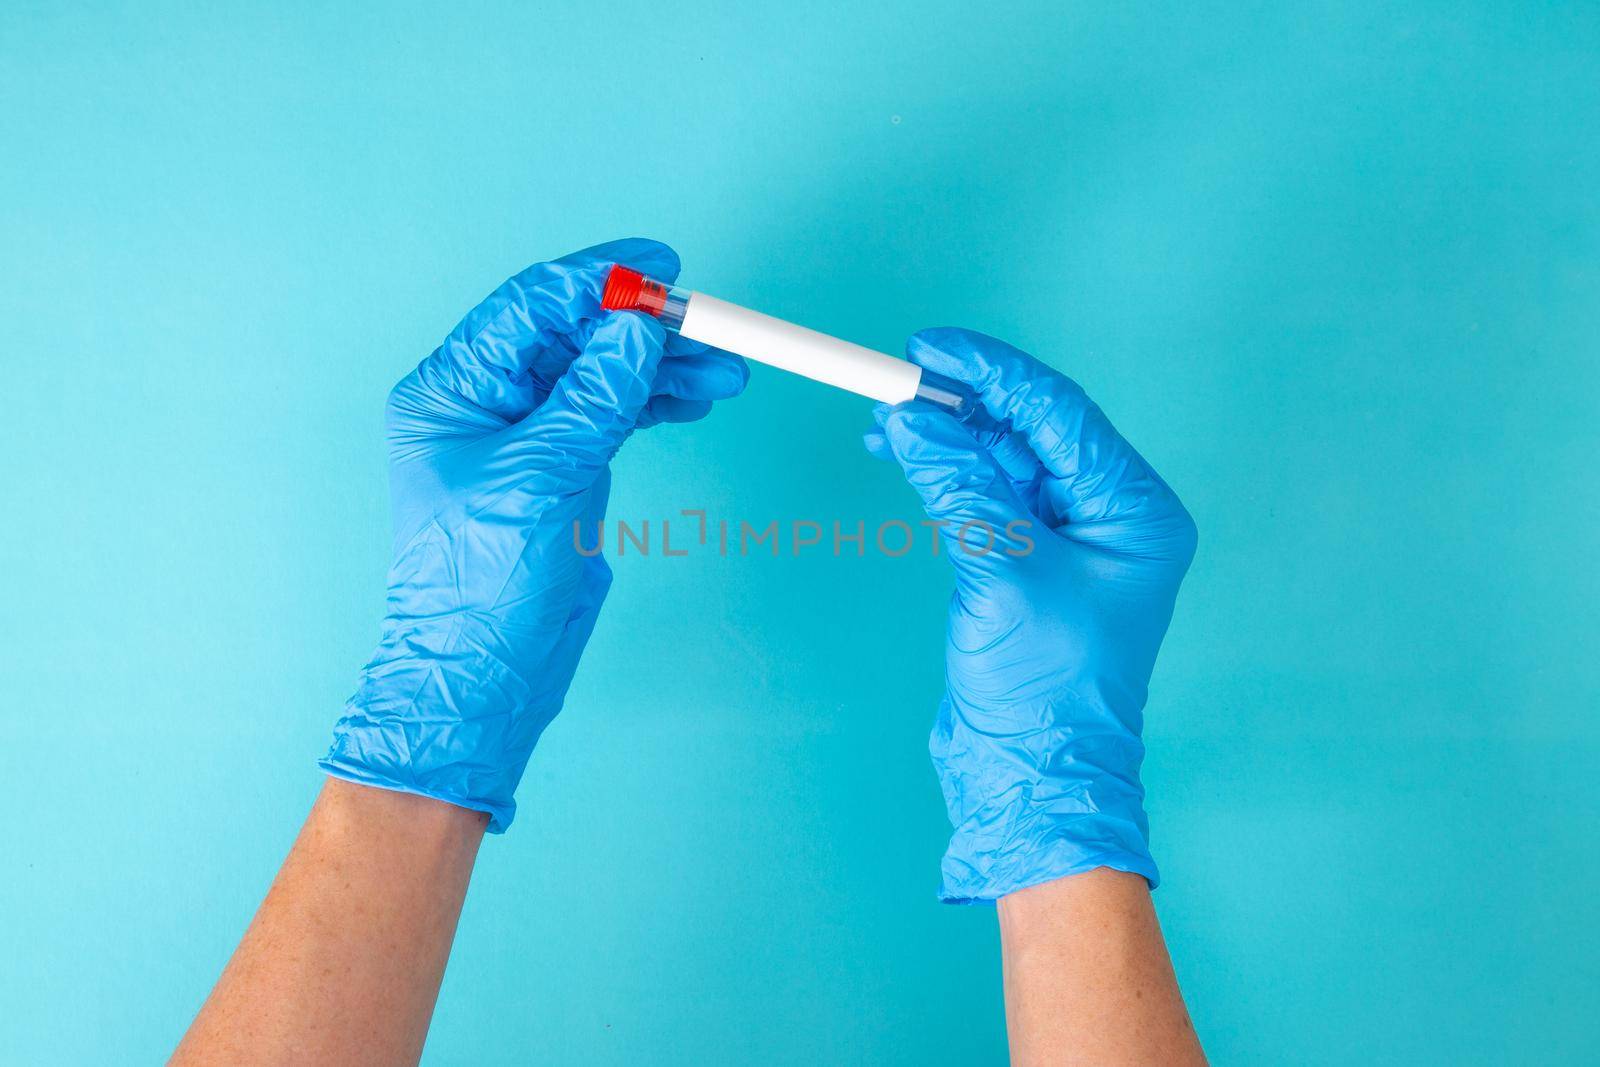 hand in blue gloves holding a test tube on blue background